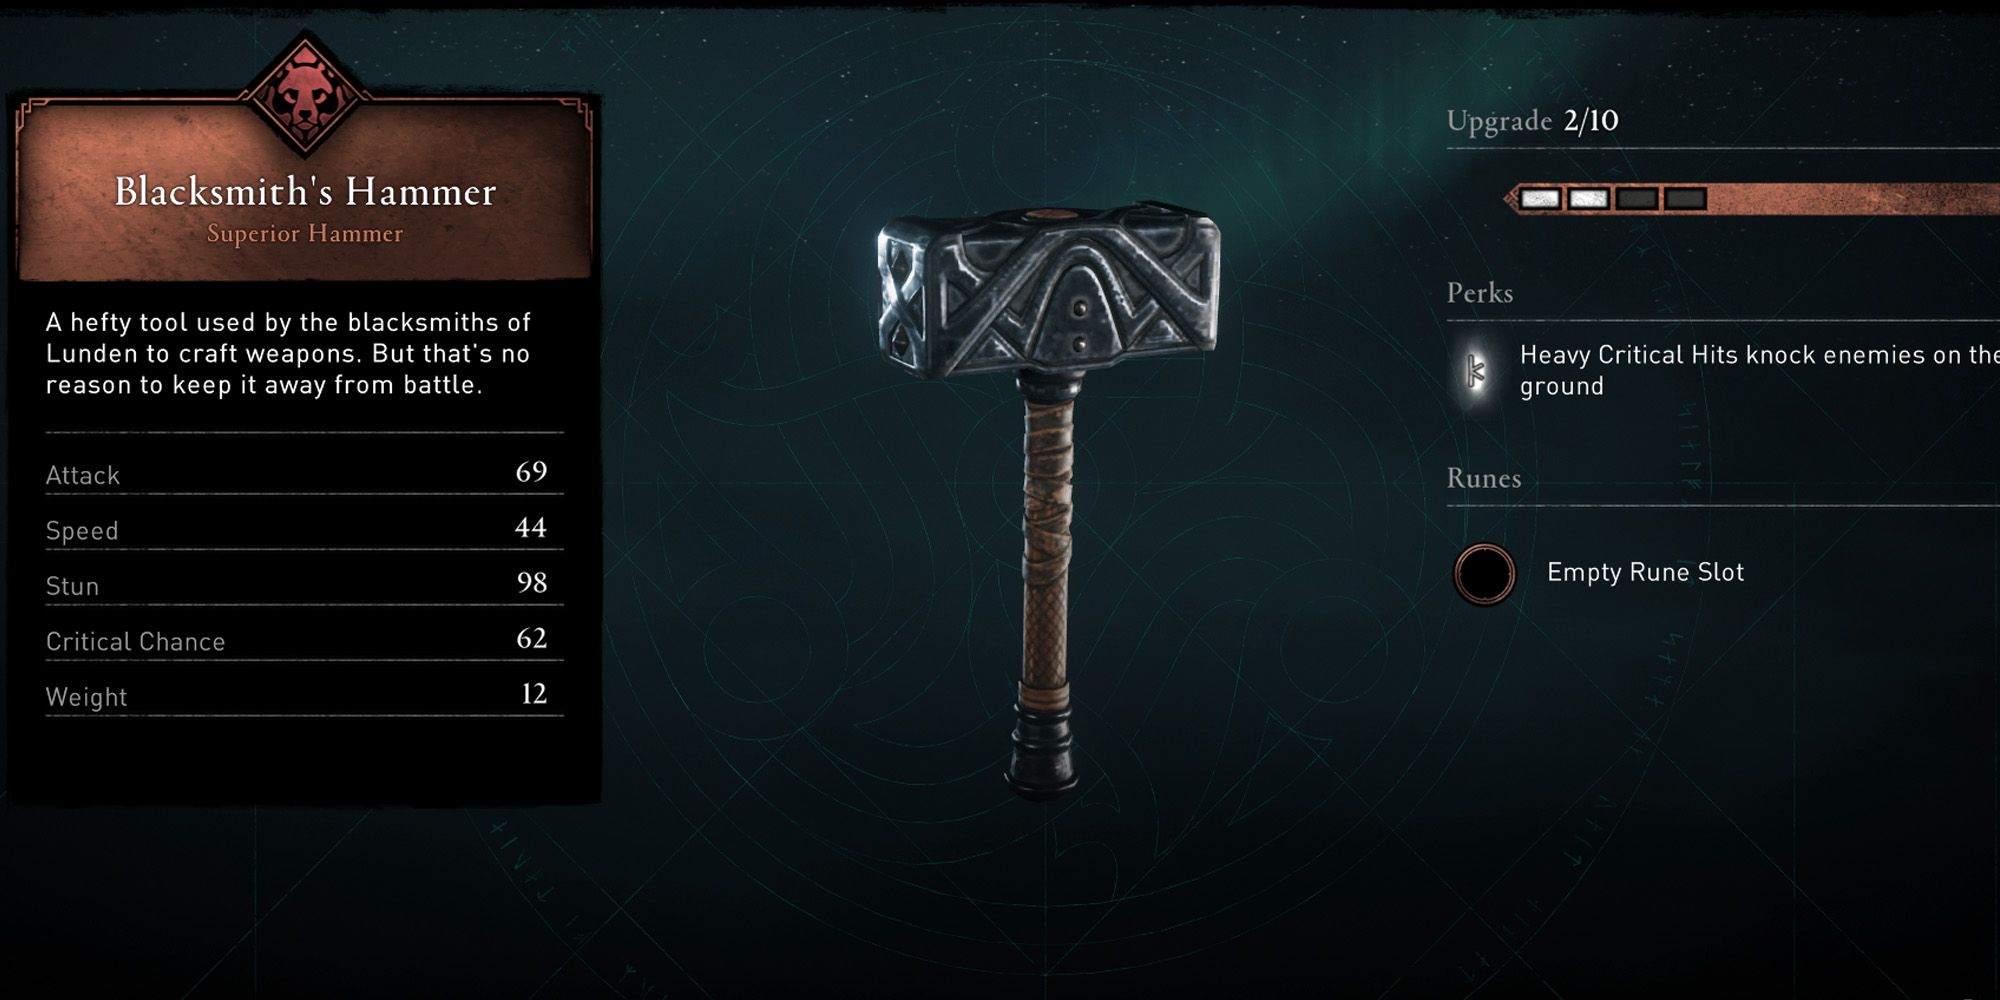 Image of the Blacksmith's Hammer and its stats in Assassin's Creed Valhalla